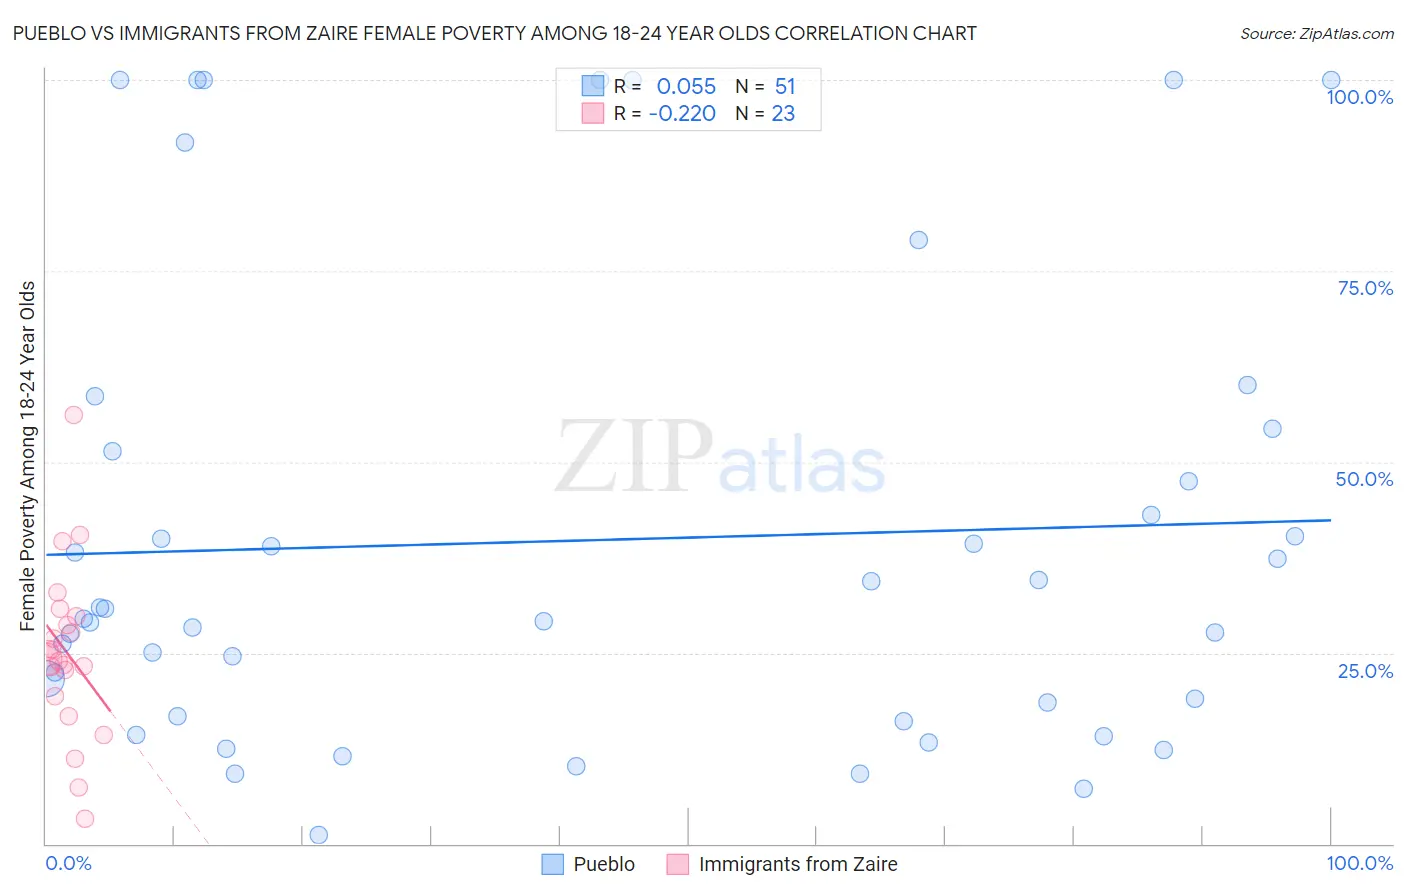 Pueblo vs Immigrants from Zaire Female Poverty Among 18-24 Year Olds